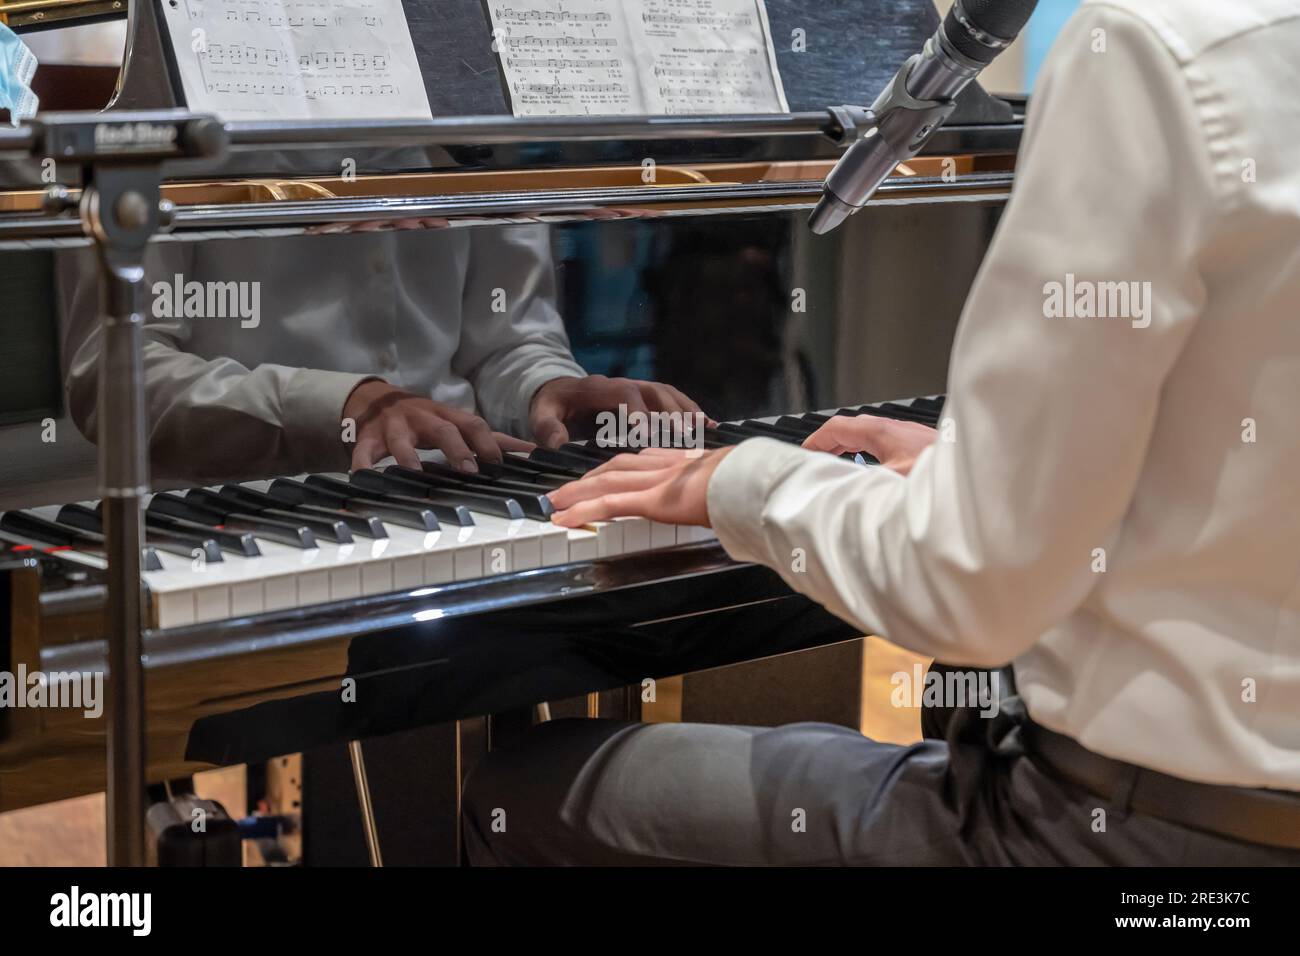 19.03.2021 Koblenz Germany - Male Hand playing on schimmel piano at party Event dinner Close-up Small depth of field. Stock Photo